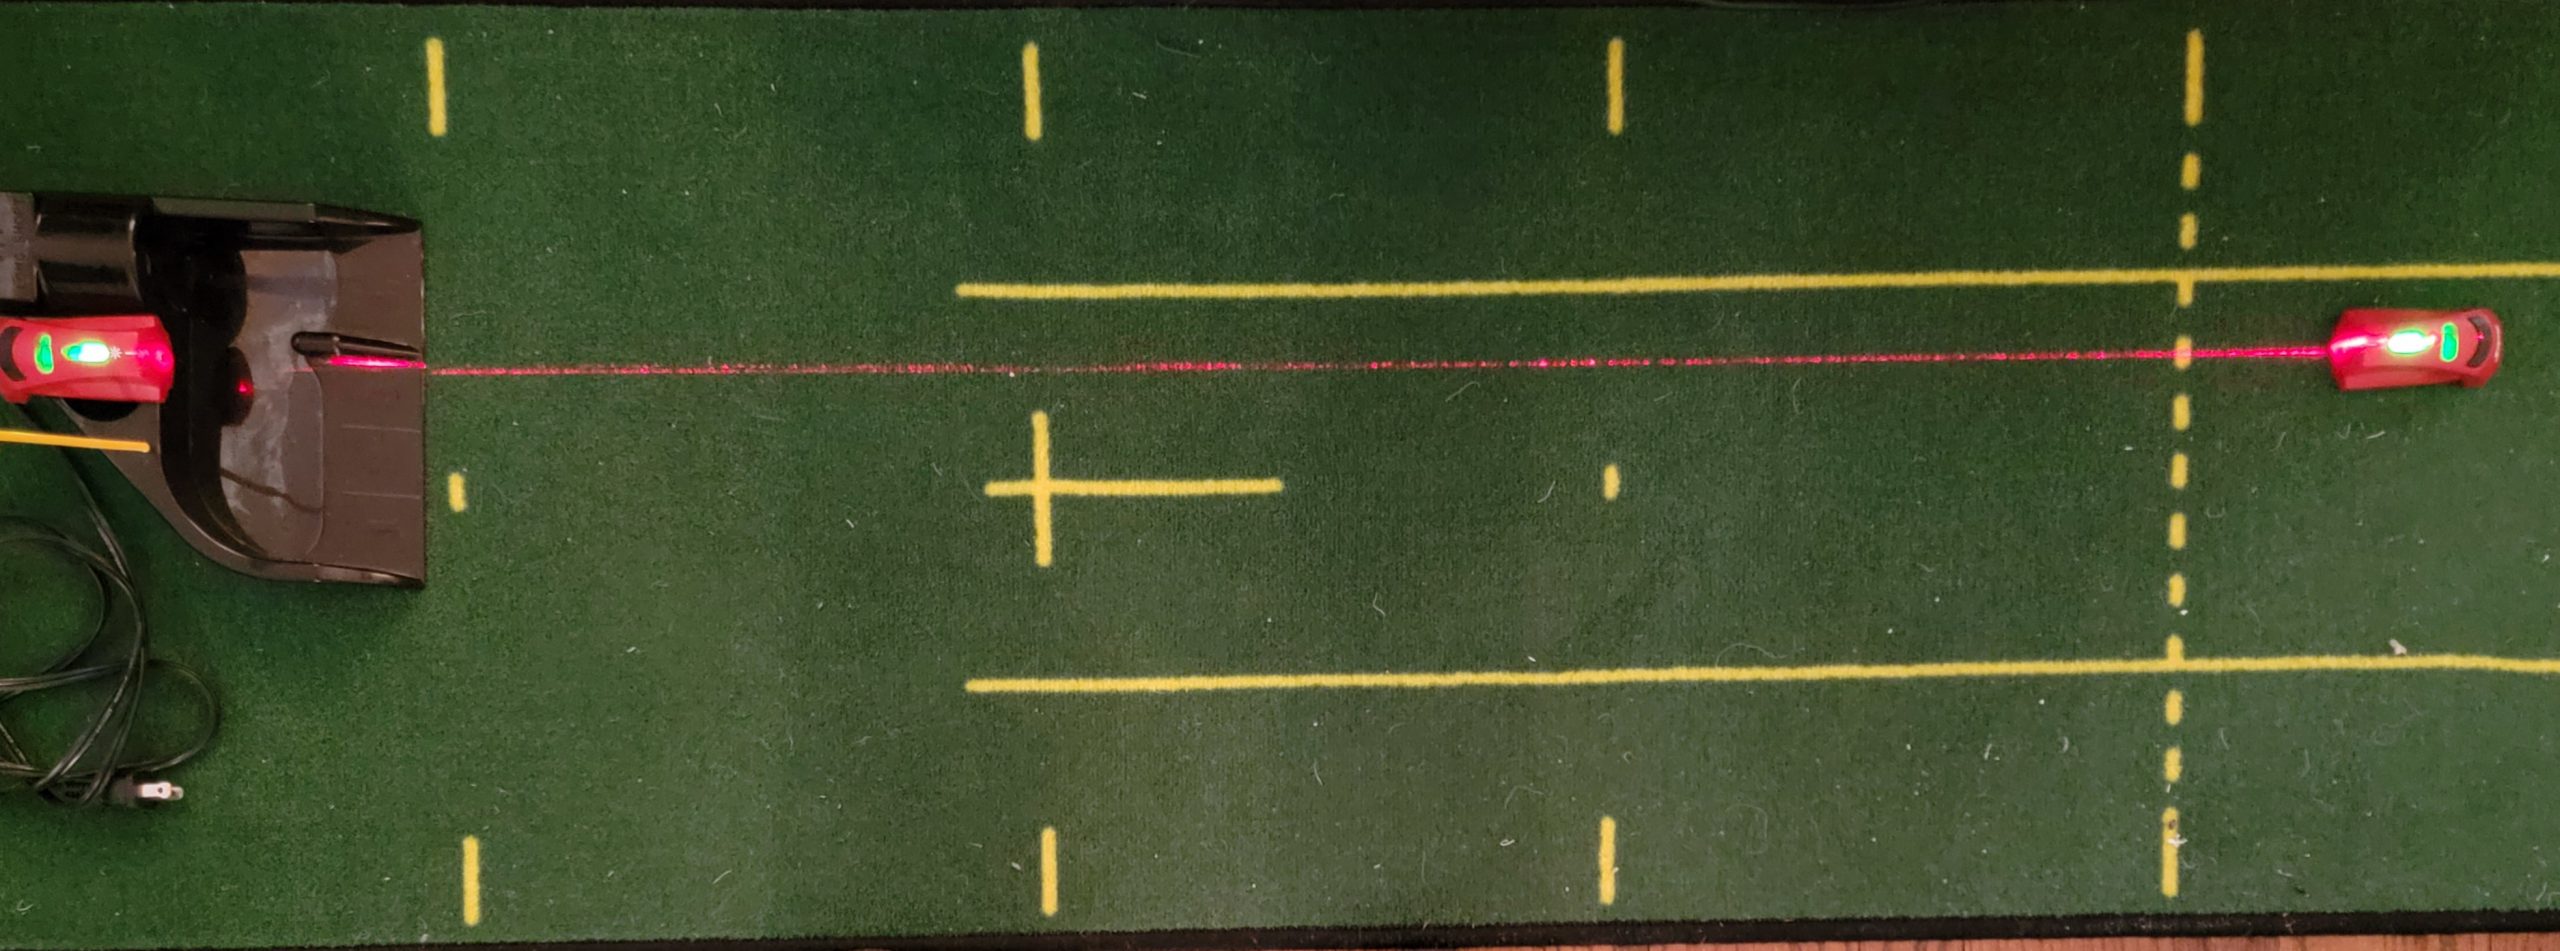 Old Duffer Golf image of two laser pointed at each other for an aim line